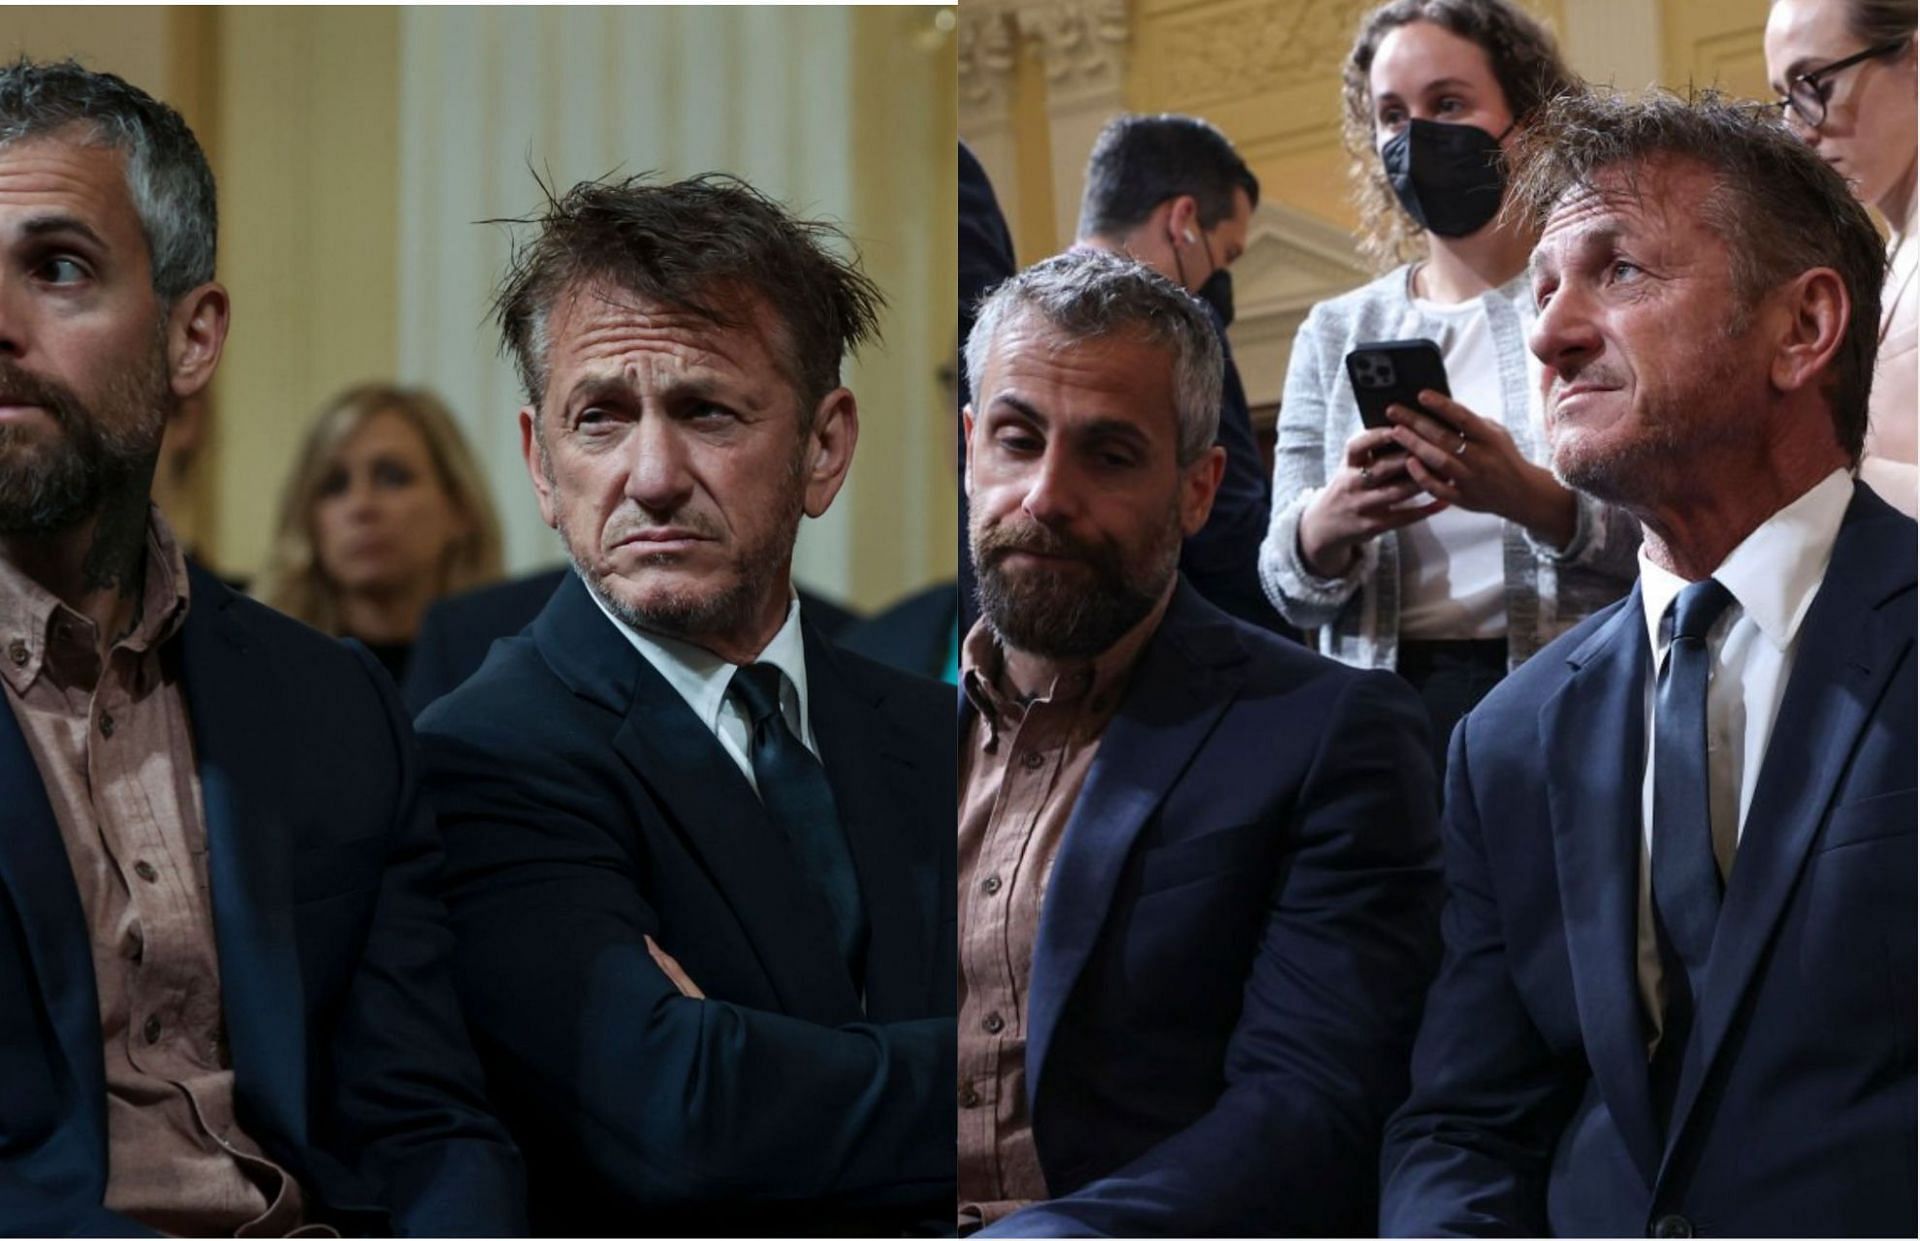 Sean Penn was spotted at the fifth January 6 committee hearing (Image via Getty Images)